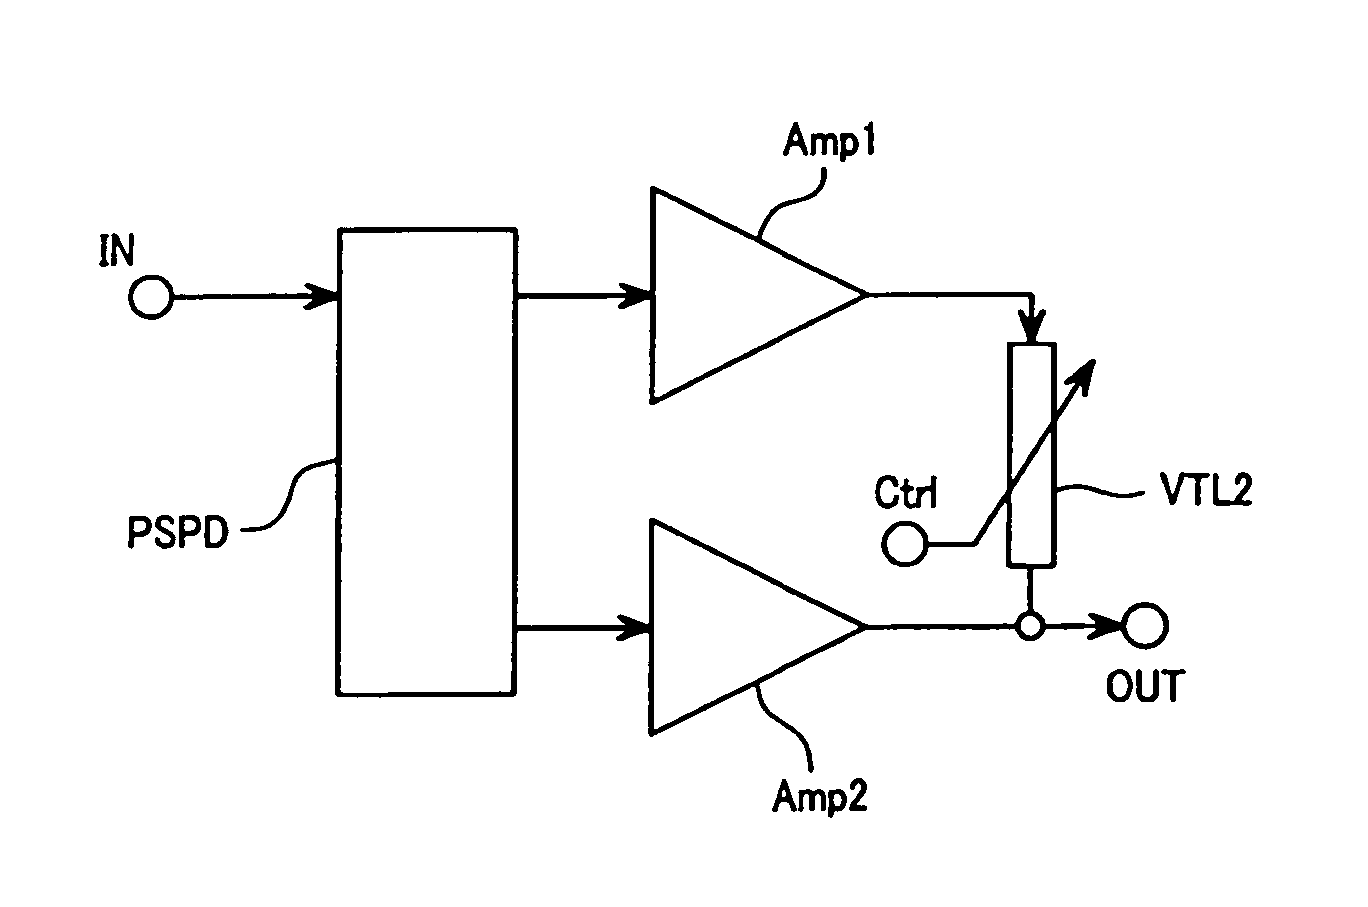 Power amplifier and transmitter